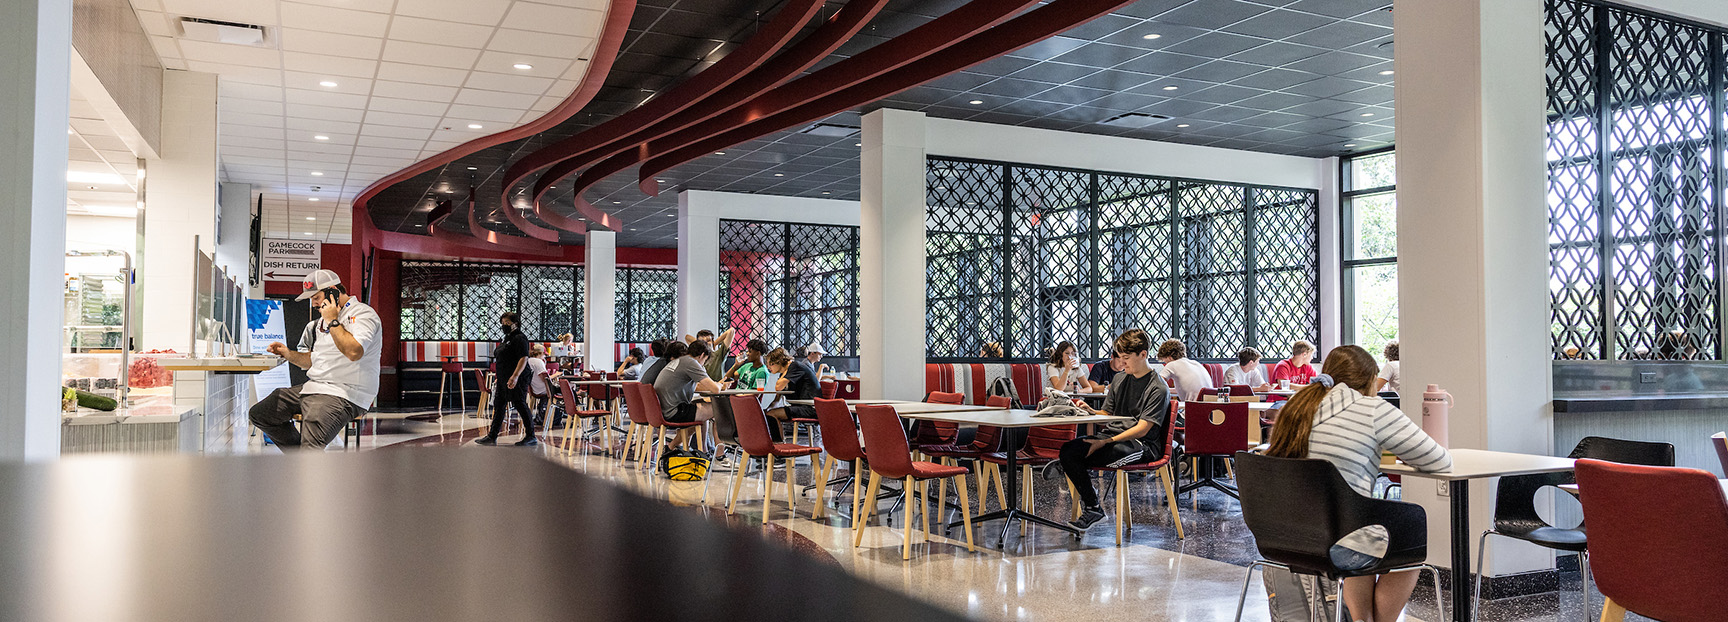 Gamecock Park dining space with students sat at tables